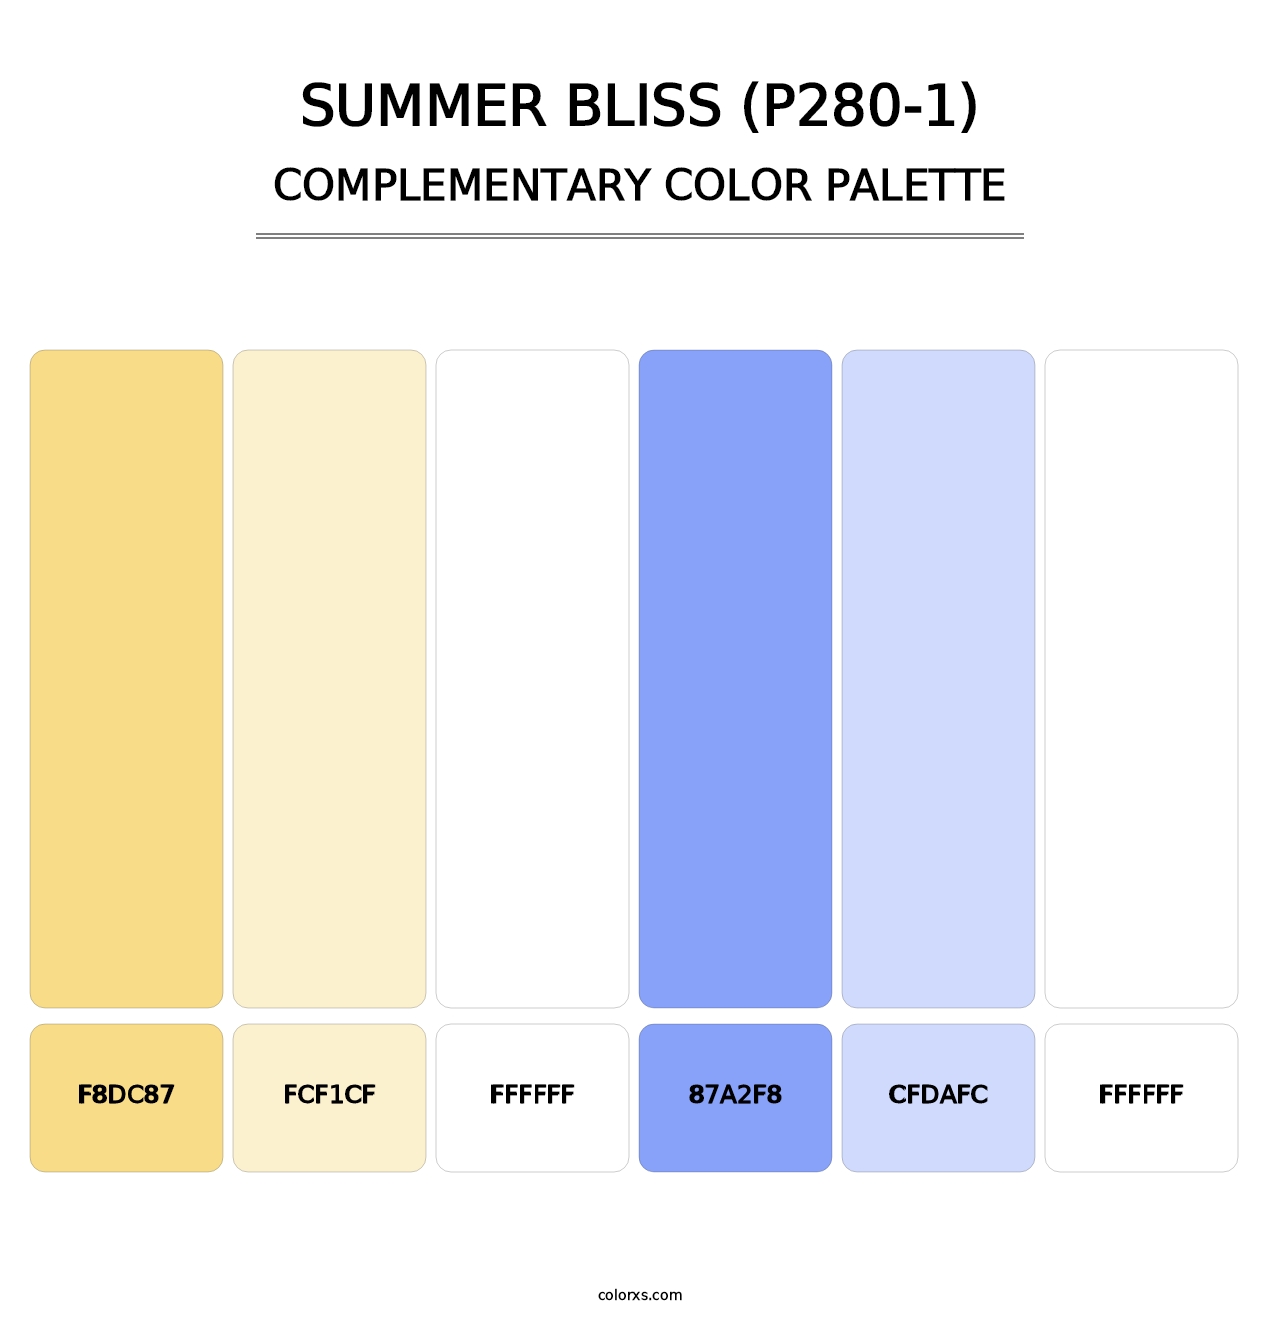 Summer Bliss (P280-1) - Complementary Color Palette